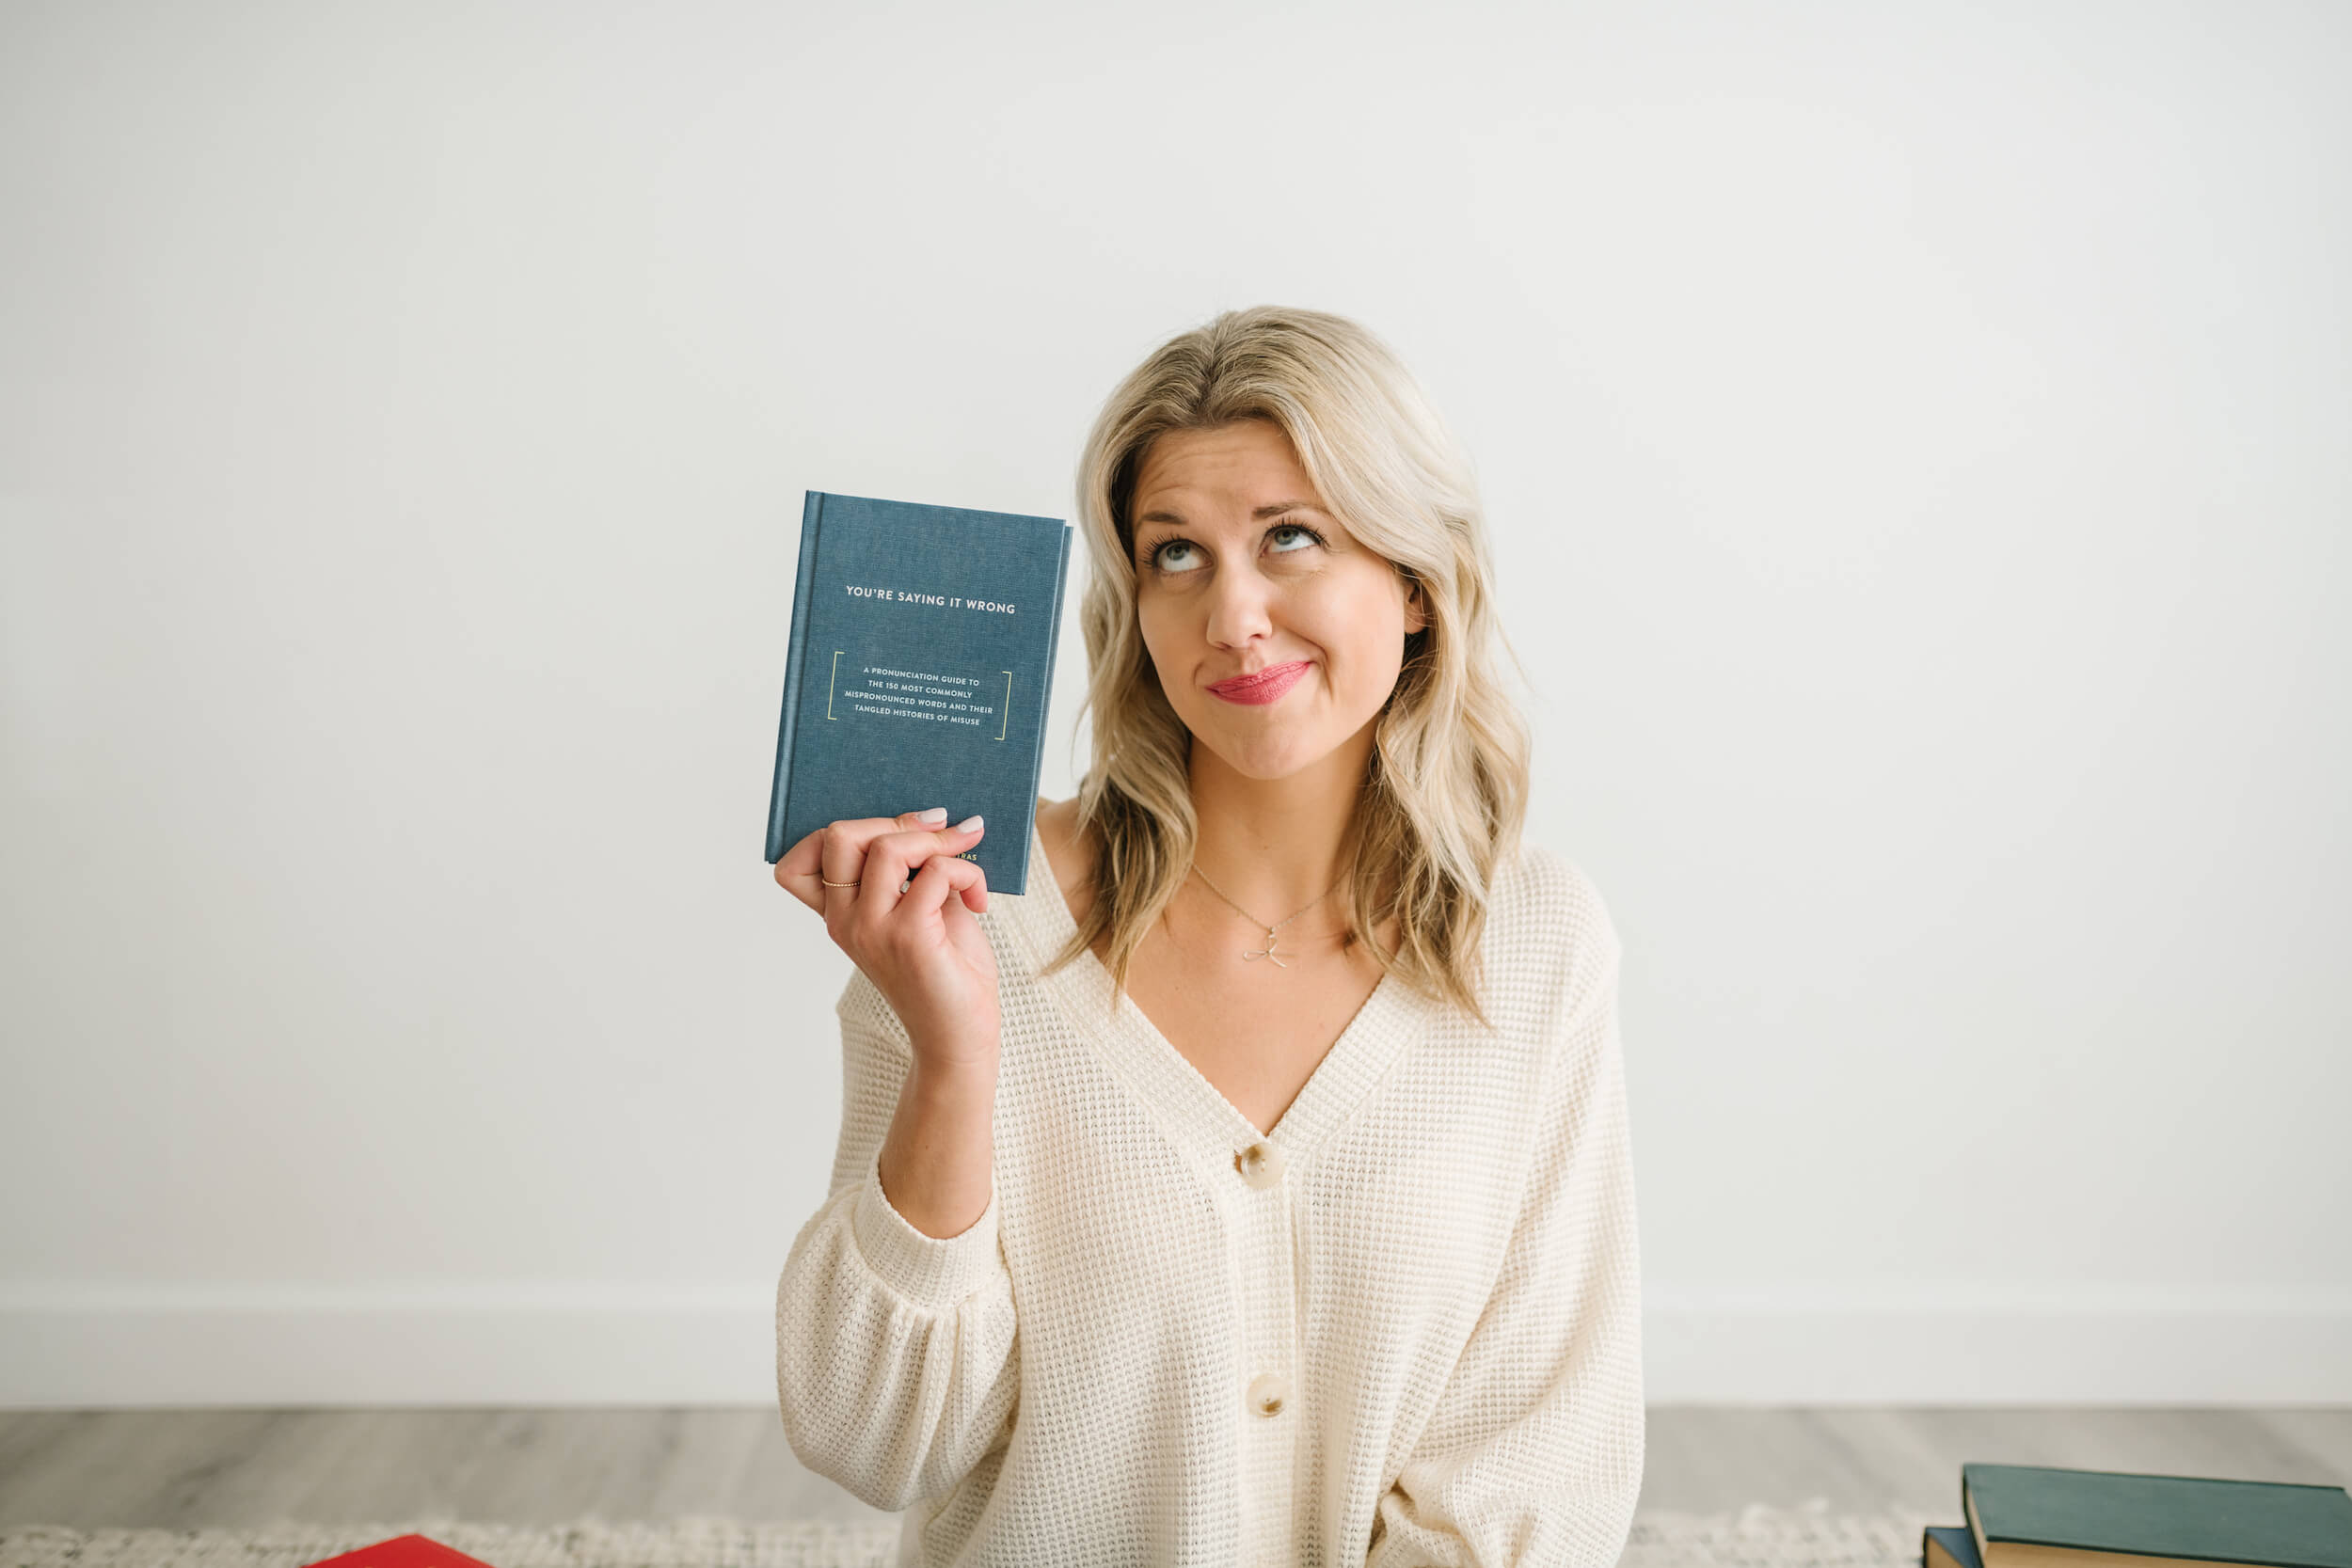 Sarah Klongerbo holding a book about editing tips for marketers